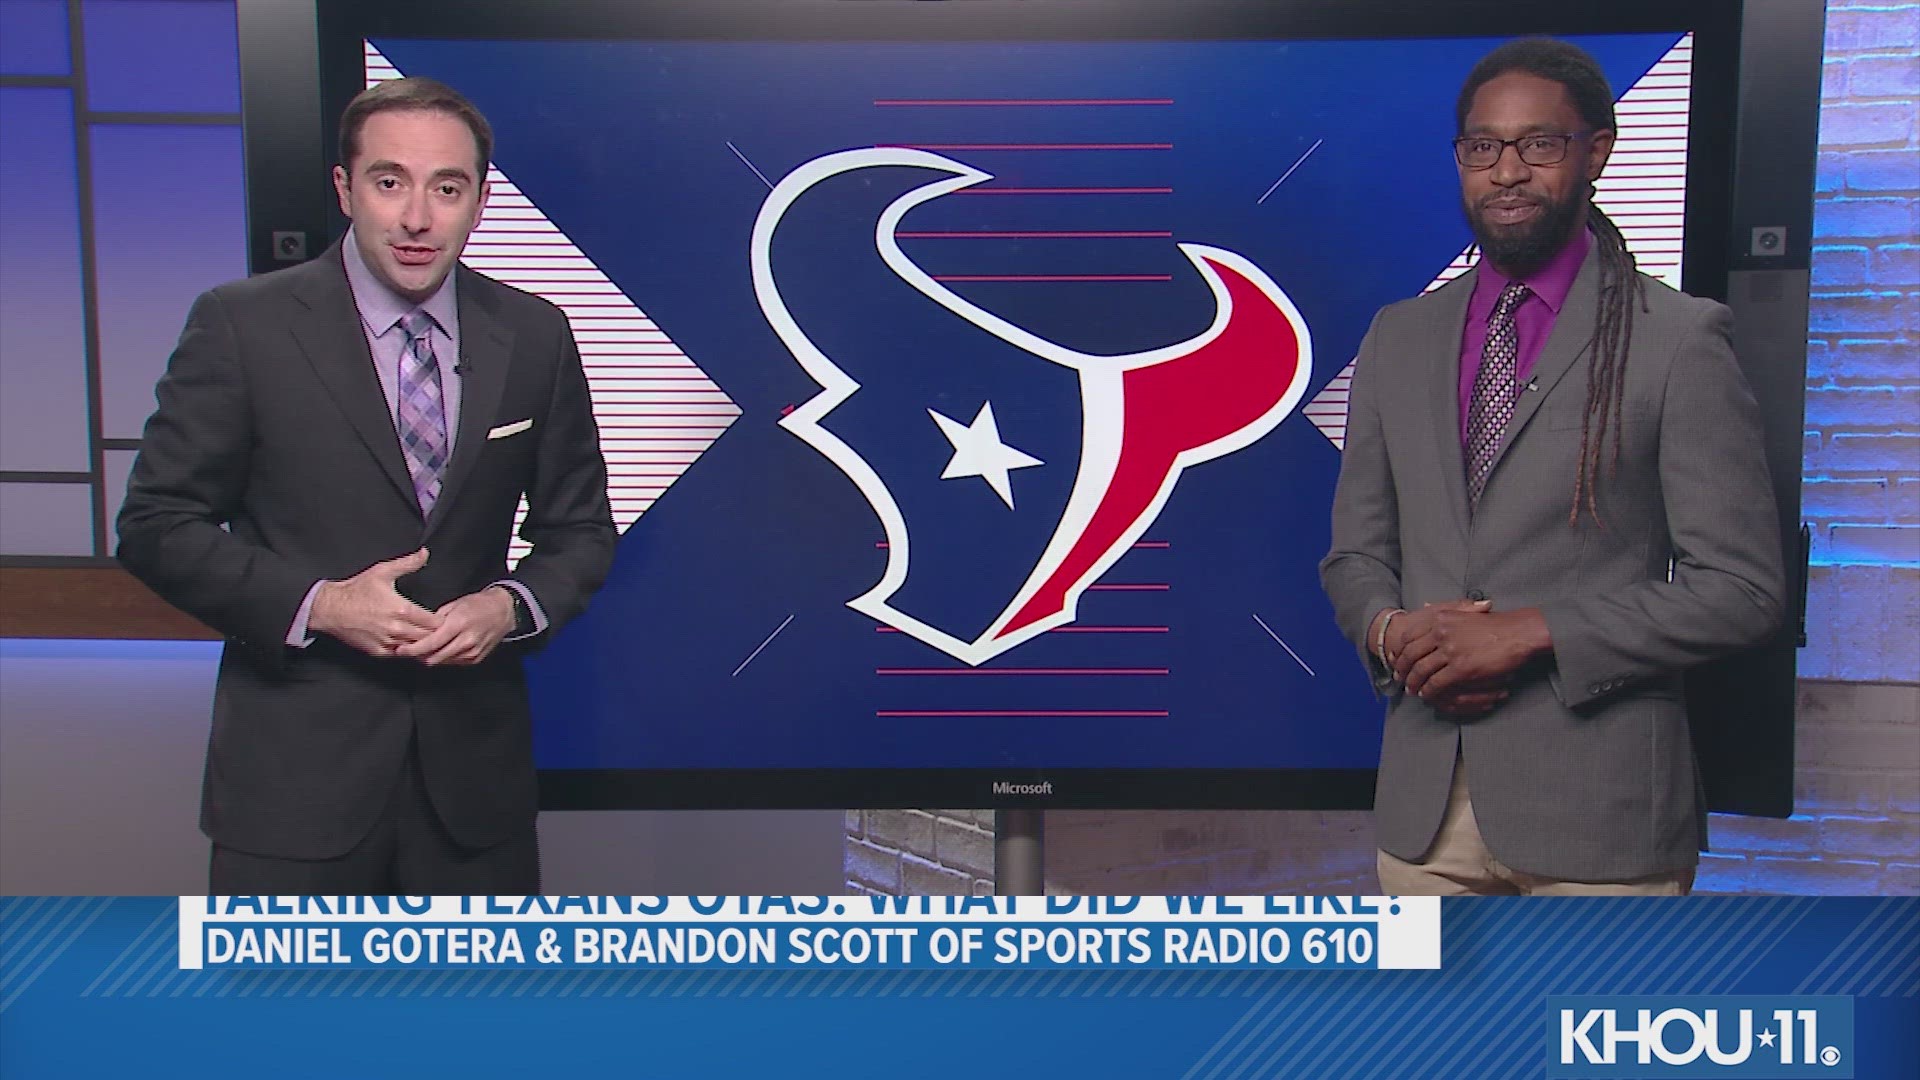 KHOU 11's Daniel Gotera met up with Brandon Scott from SportsRadio 610 to discuss the Texans' OTAs ahead of the upcoming NFL season.